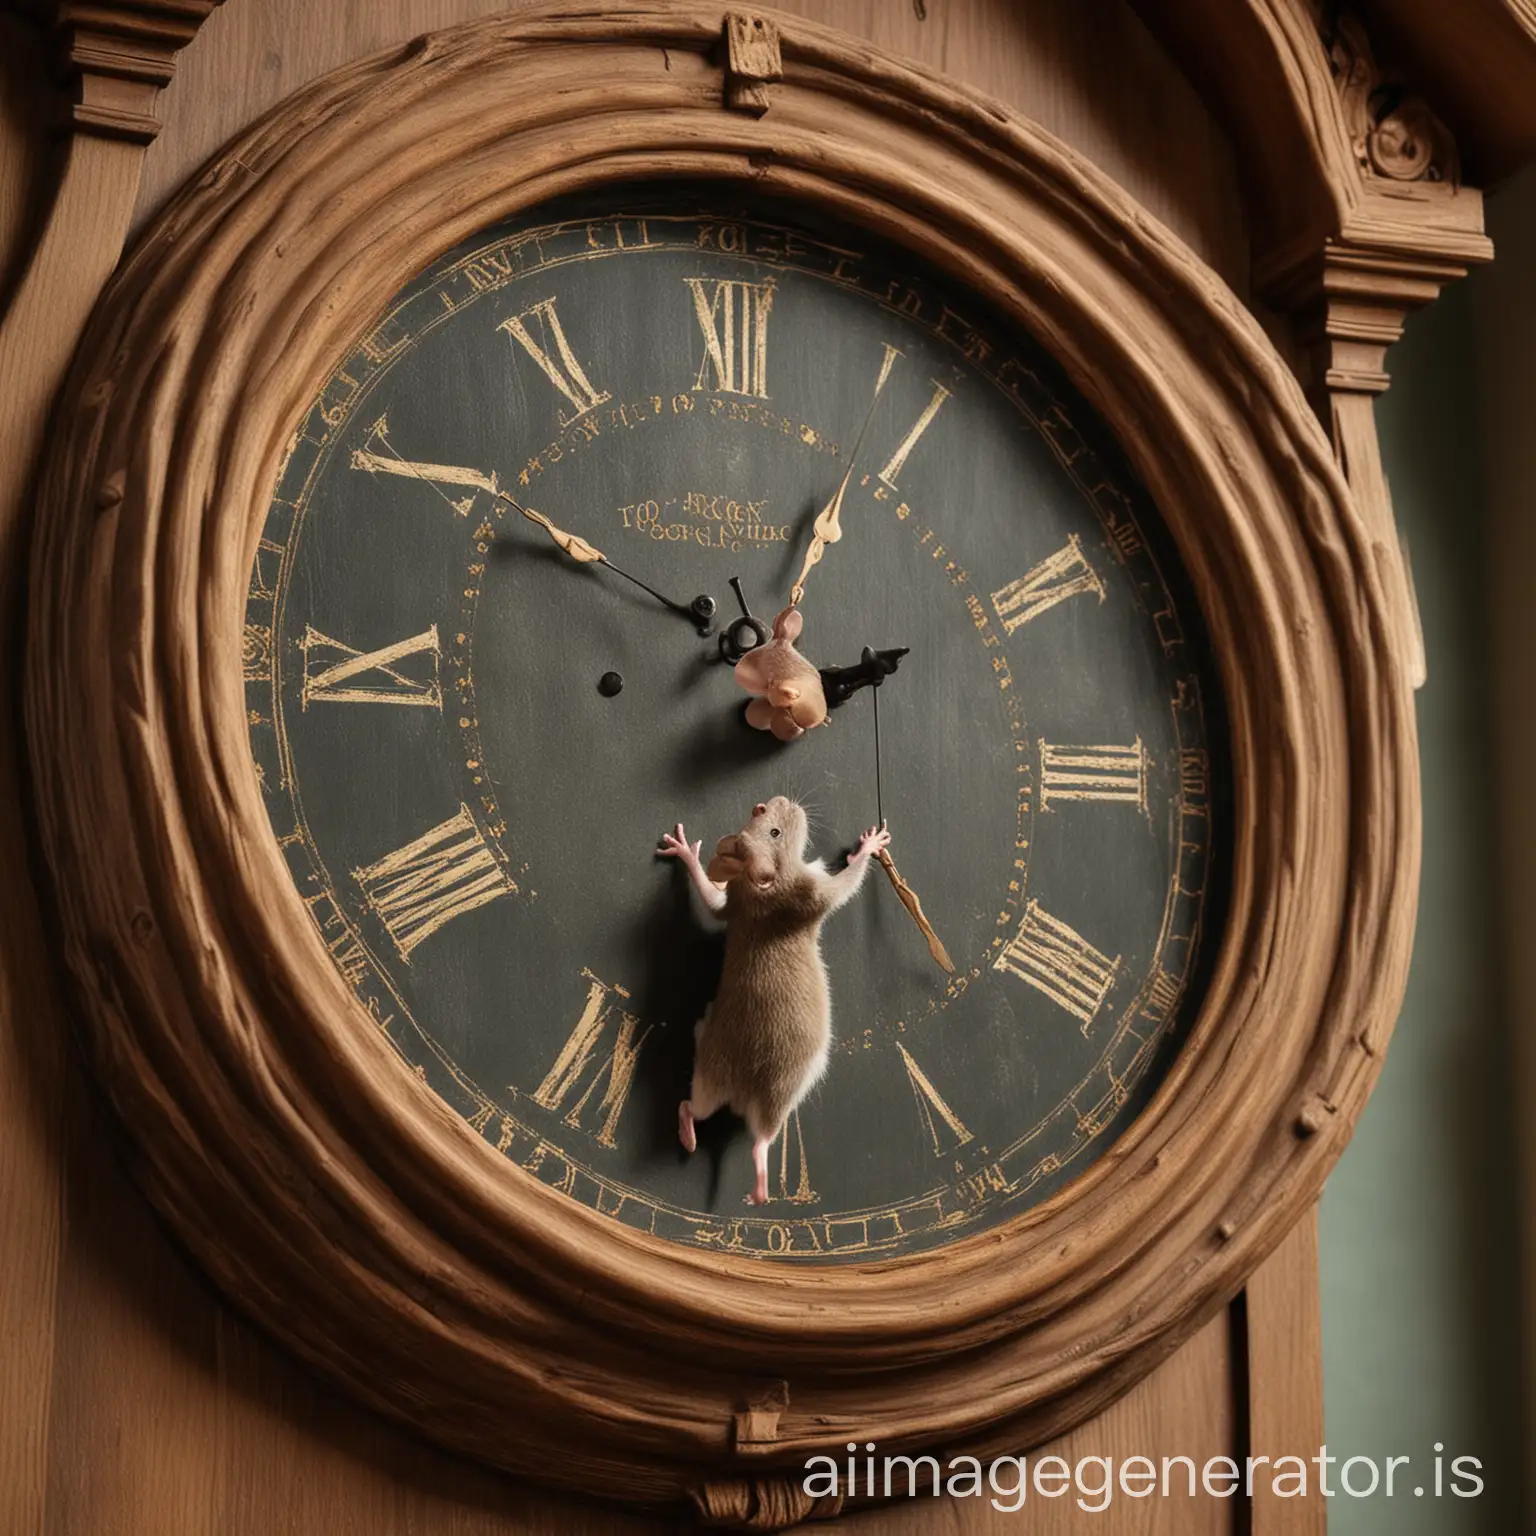 Upon a grand clock, he perches with grace,
Tickling the hands as they race and they chase.
Hickory Dickory Dock, the mouse sings his song,
A melody weaving through moments, swift and long
